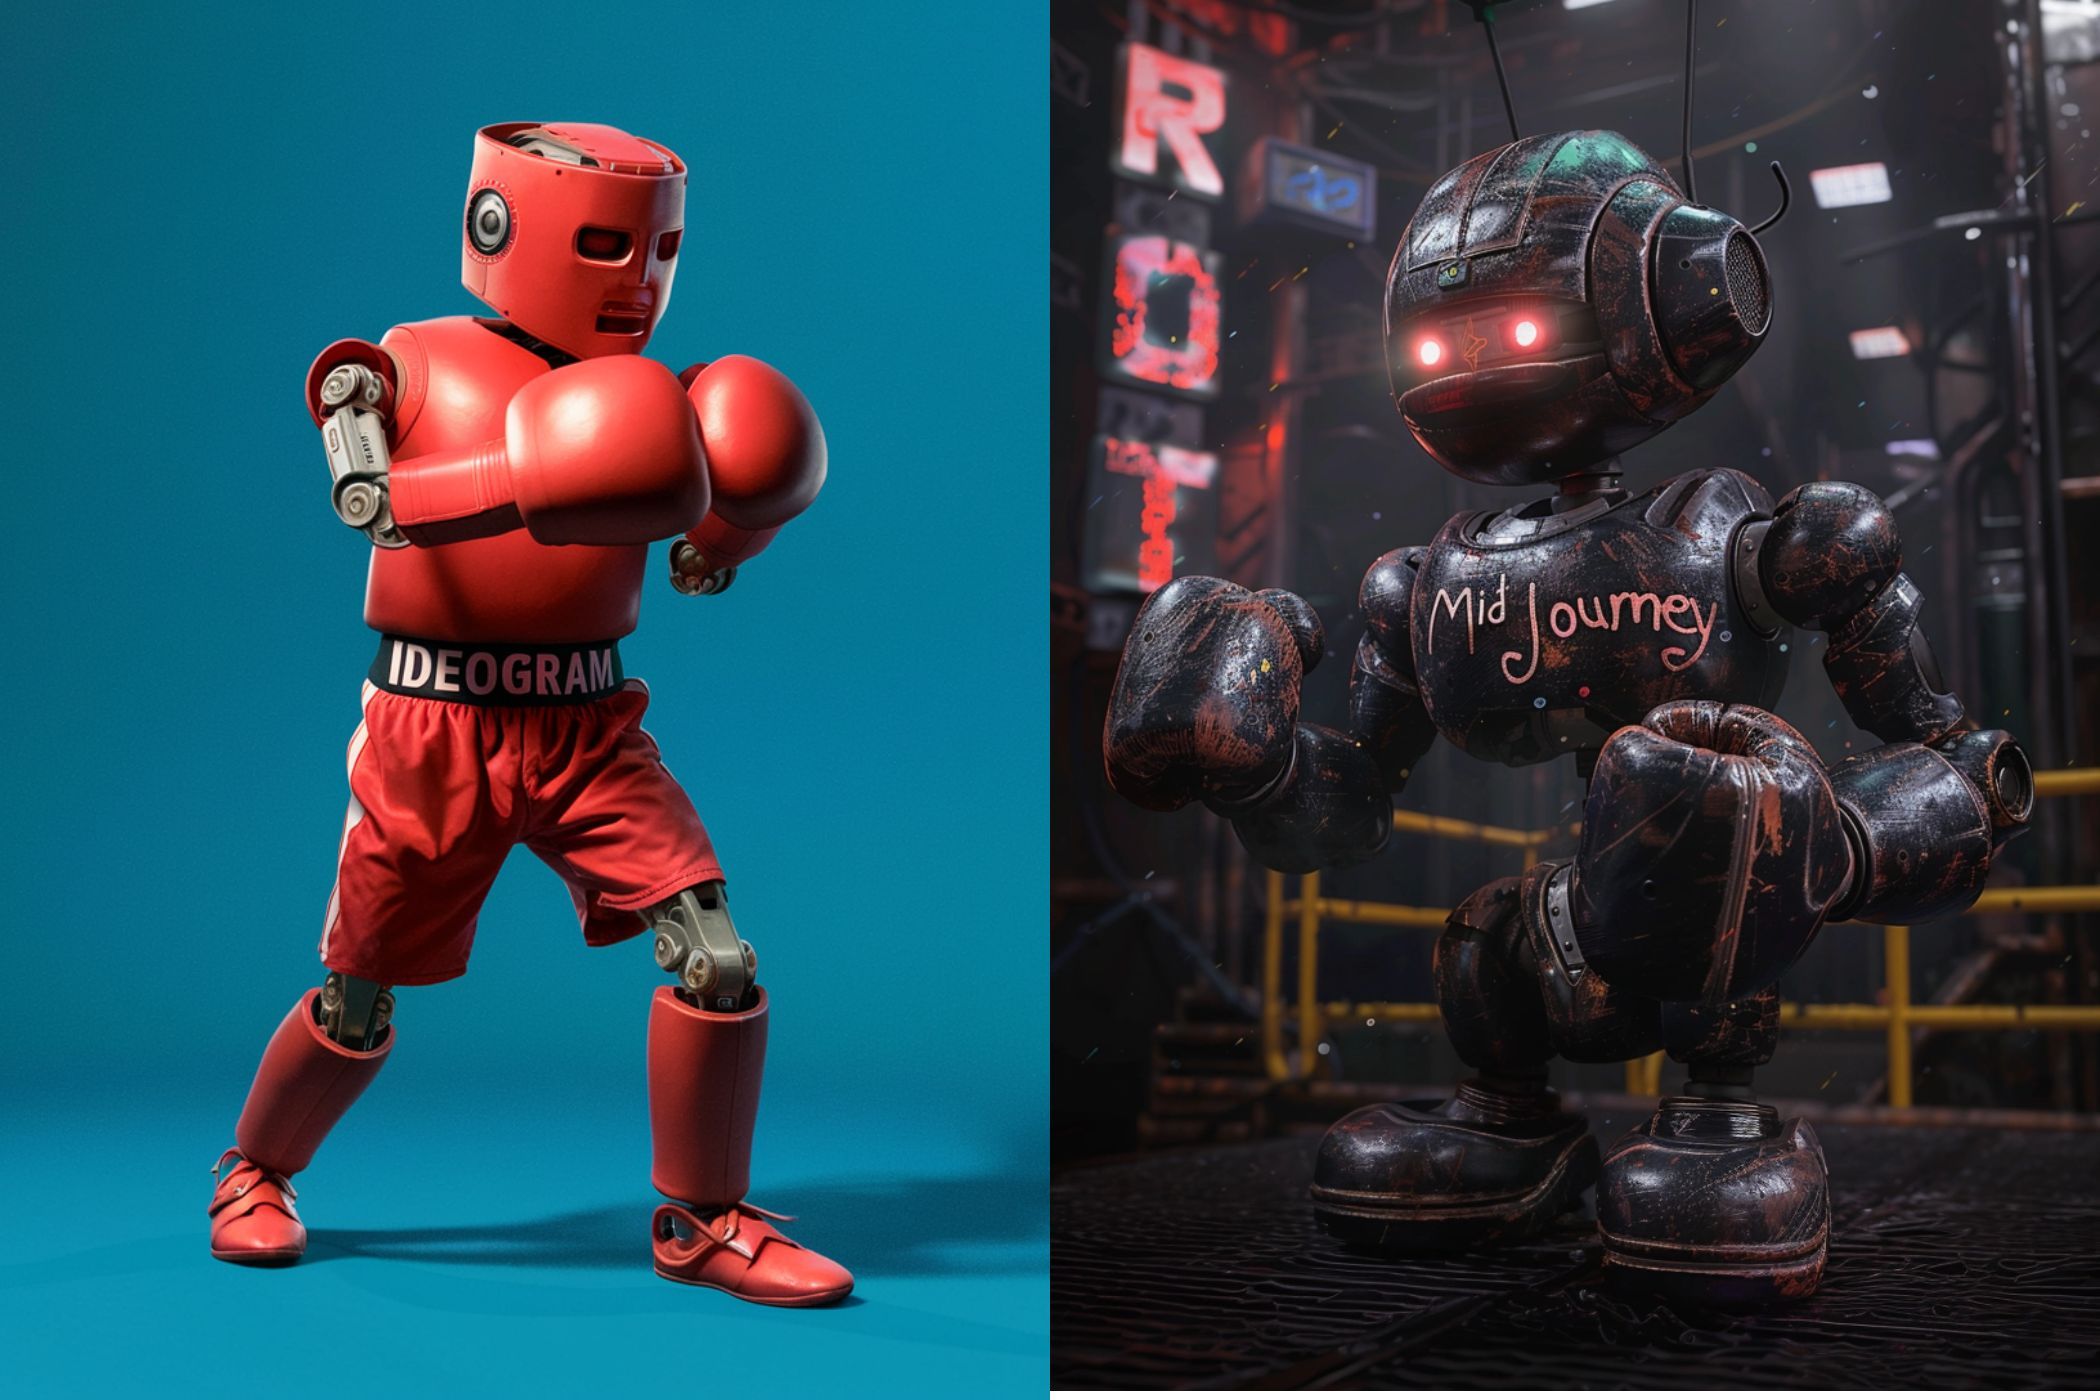 An Ideogram and Midjourney robot facing off against each other in boxing gear